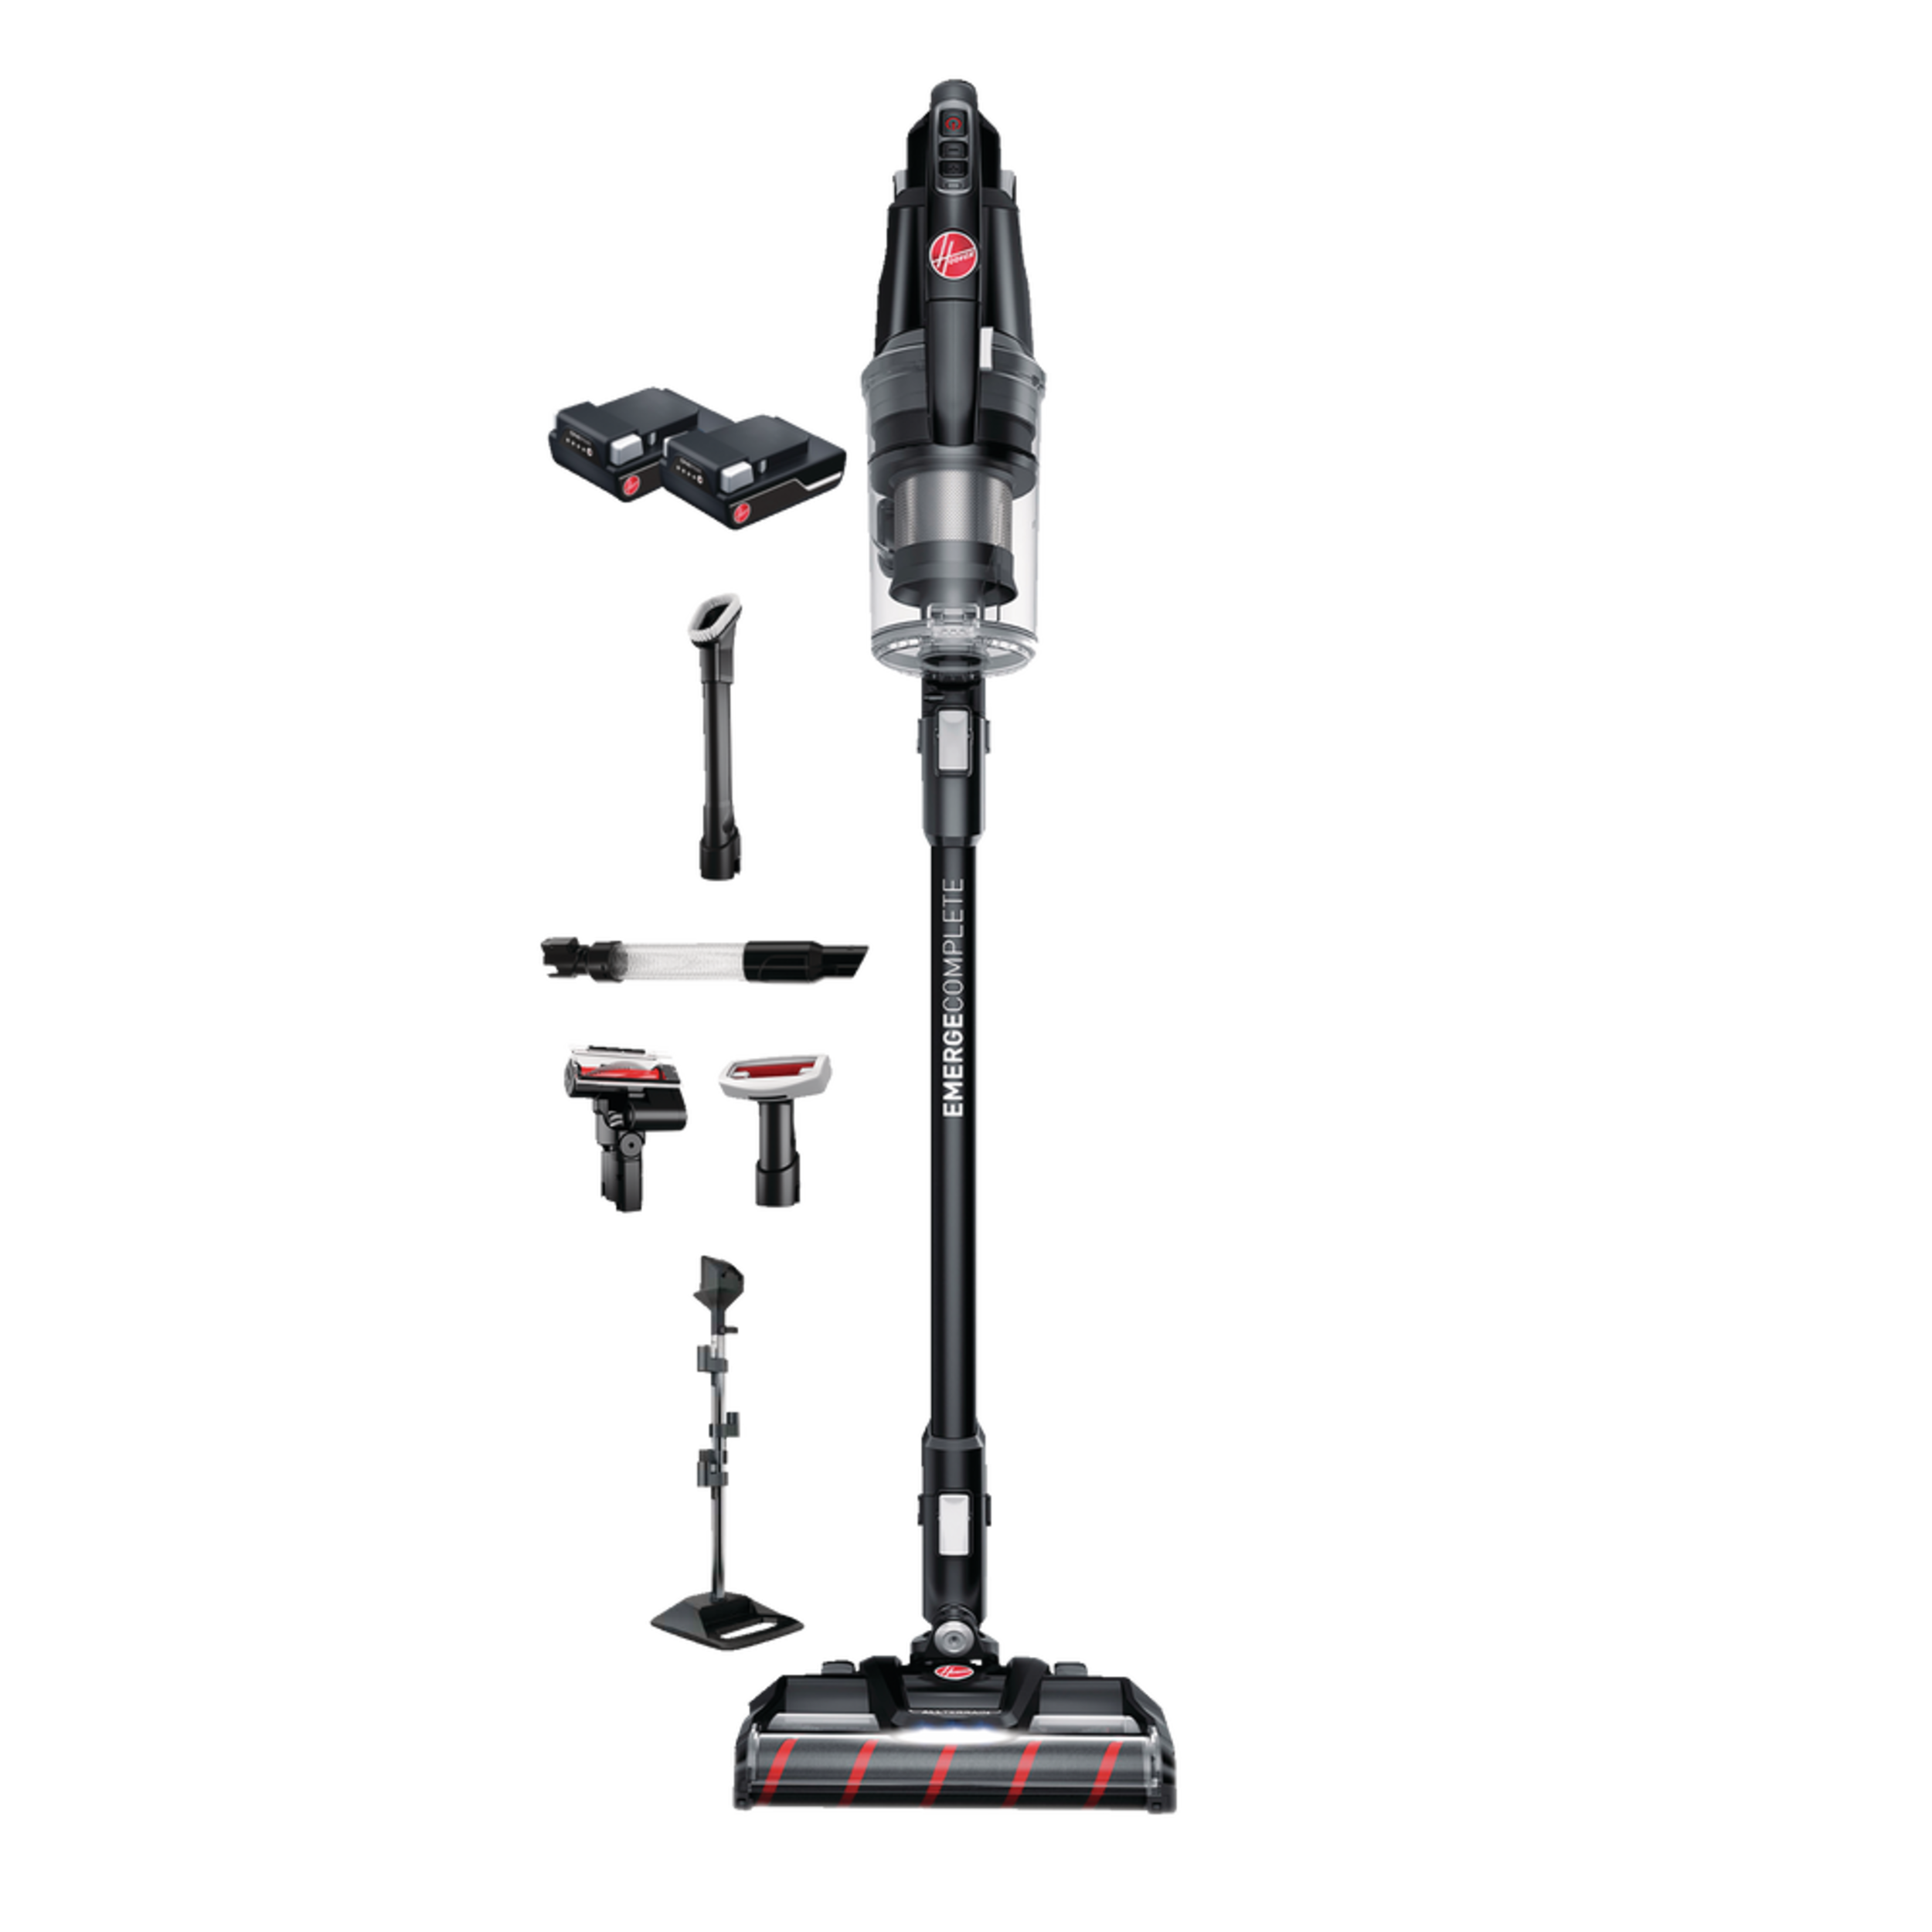 Hoover BH53644VDE ONEPWR® Emerge Complete Cordless Stick Vacuum Kit with All-Terrain™ Dual Brush Roll, Charging Stand and 2 Batteries (Refurbished - 90 Days Warranty)